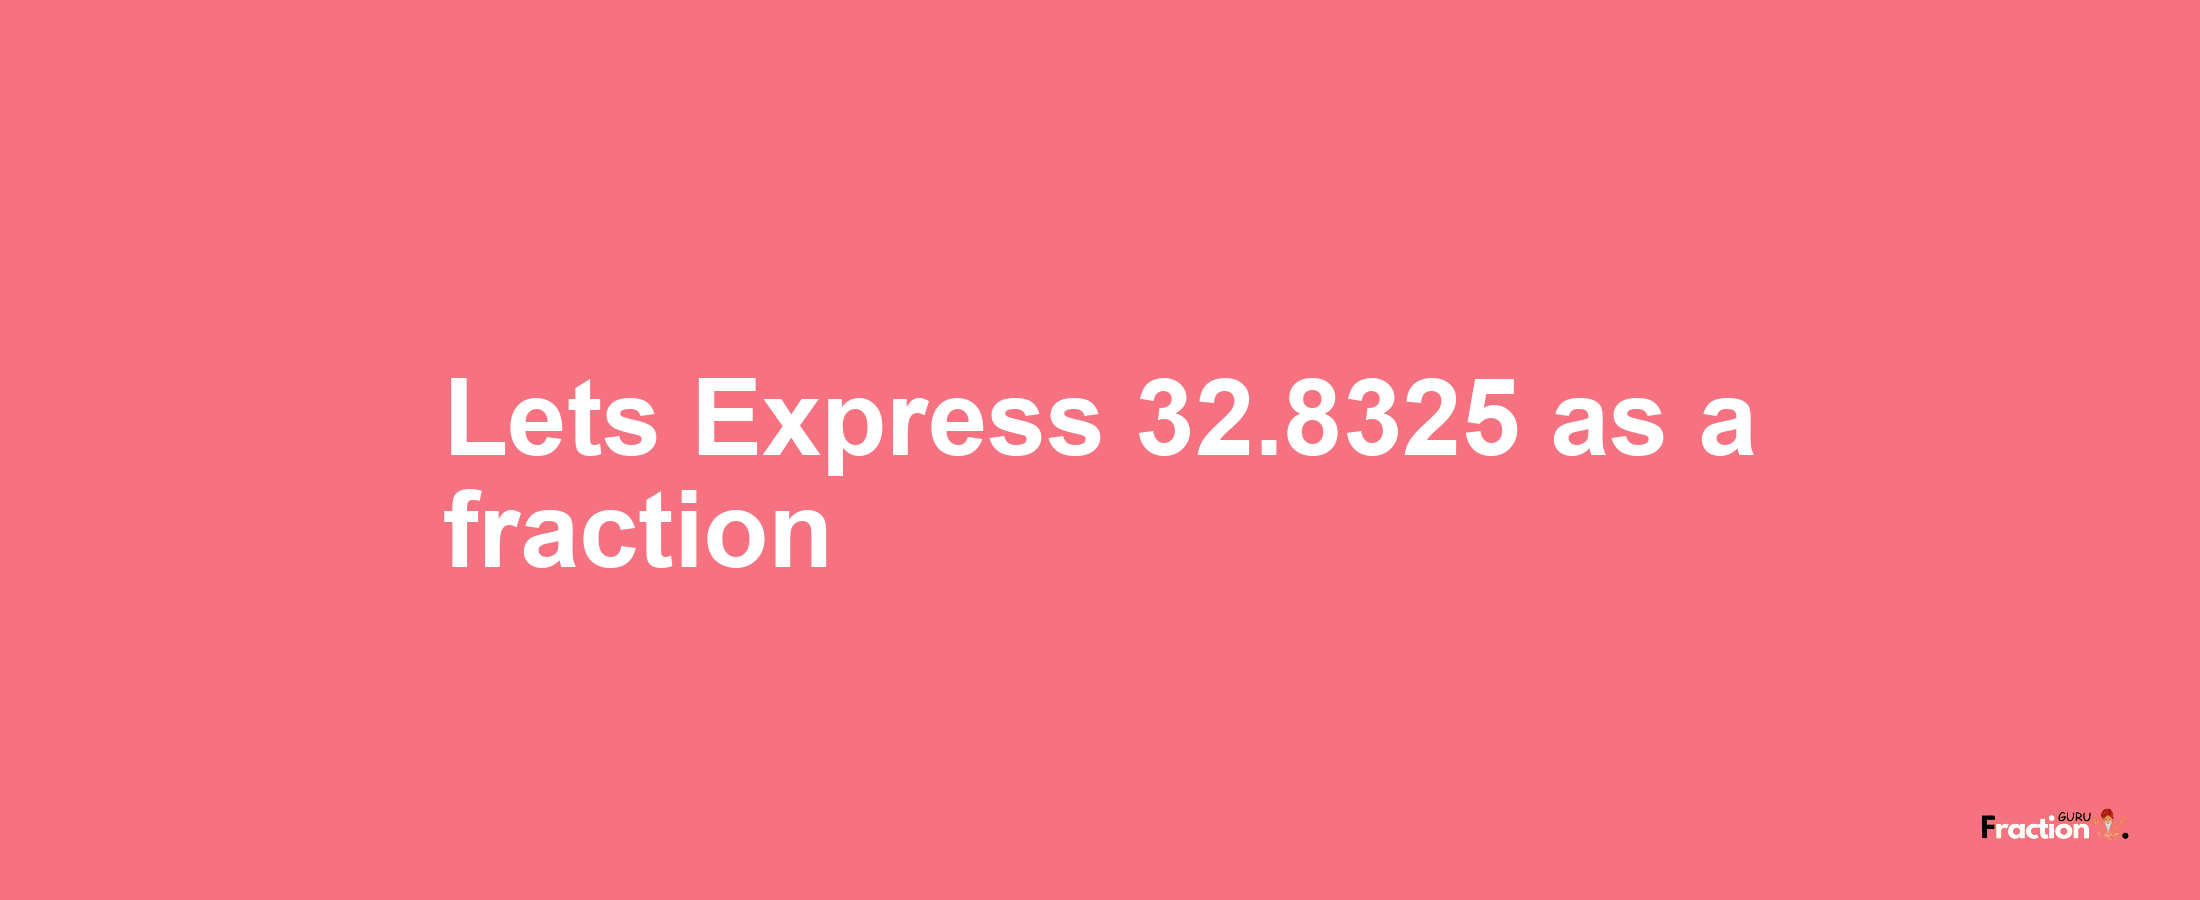 Lets Express 32.8325 as afraction